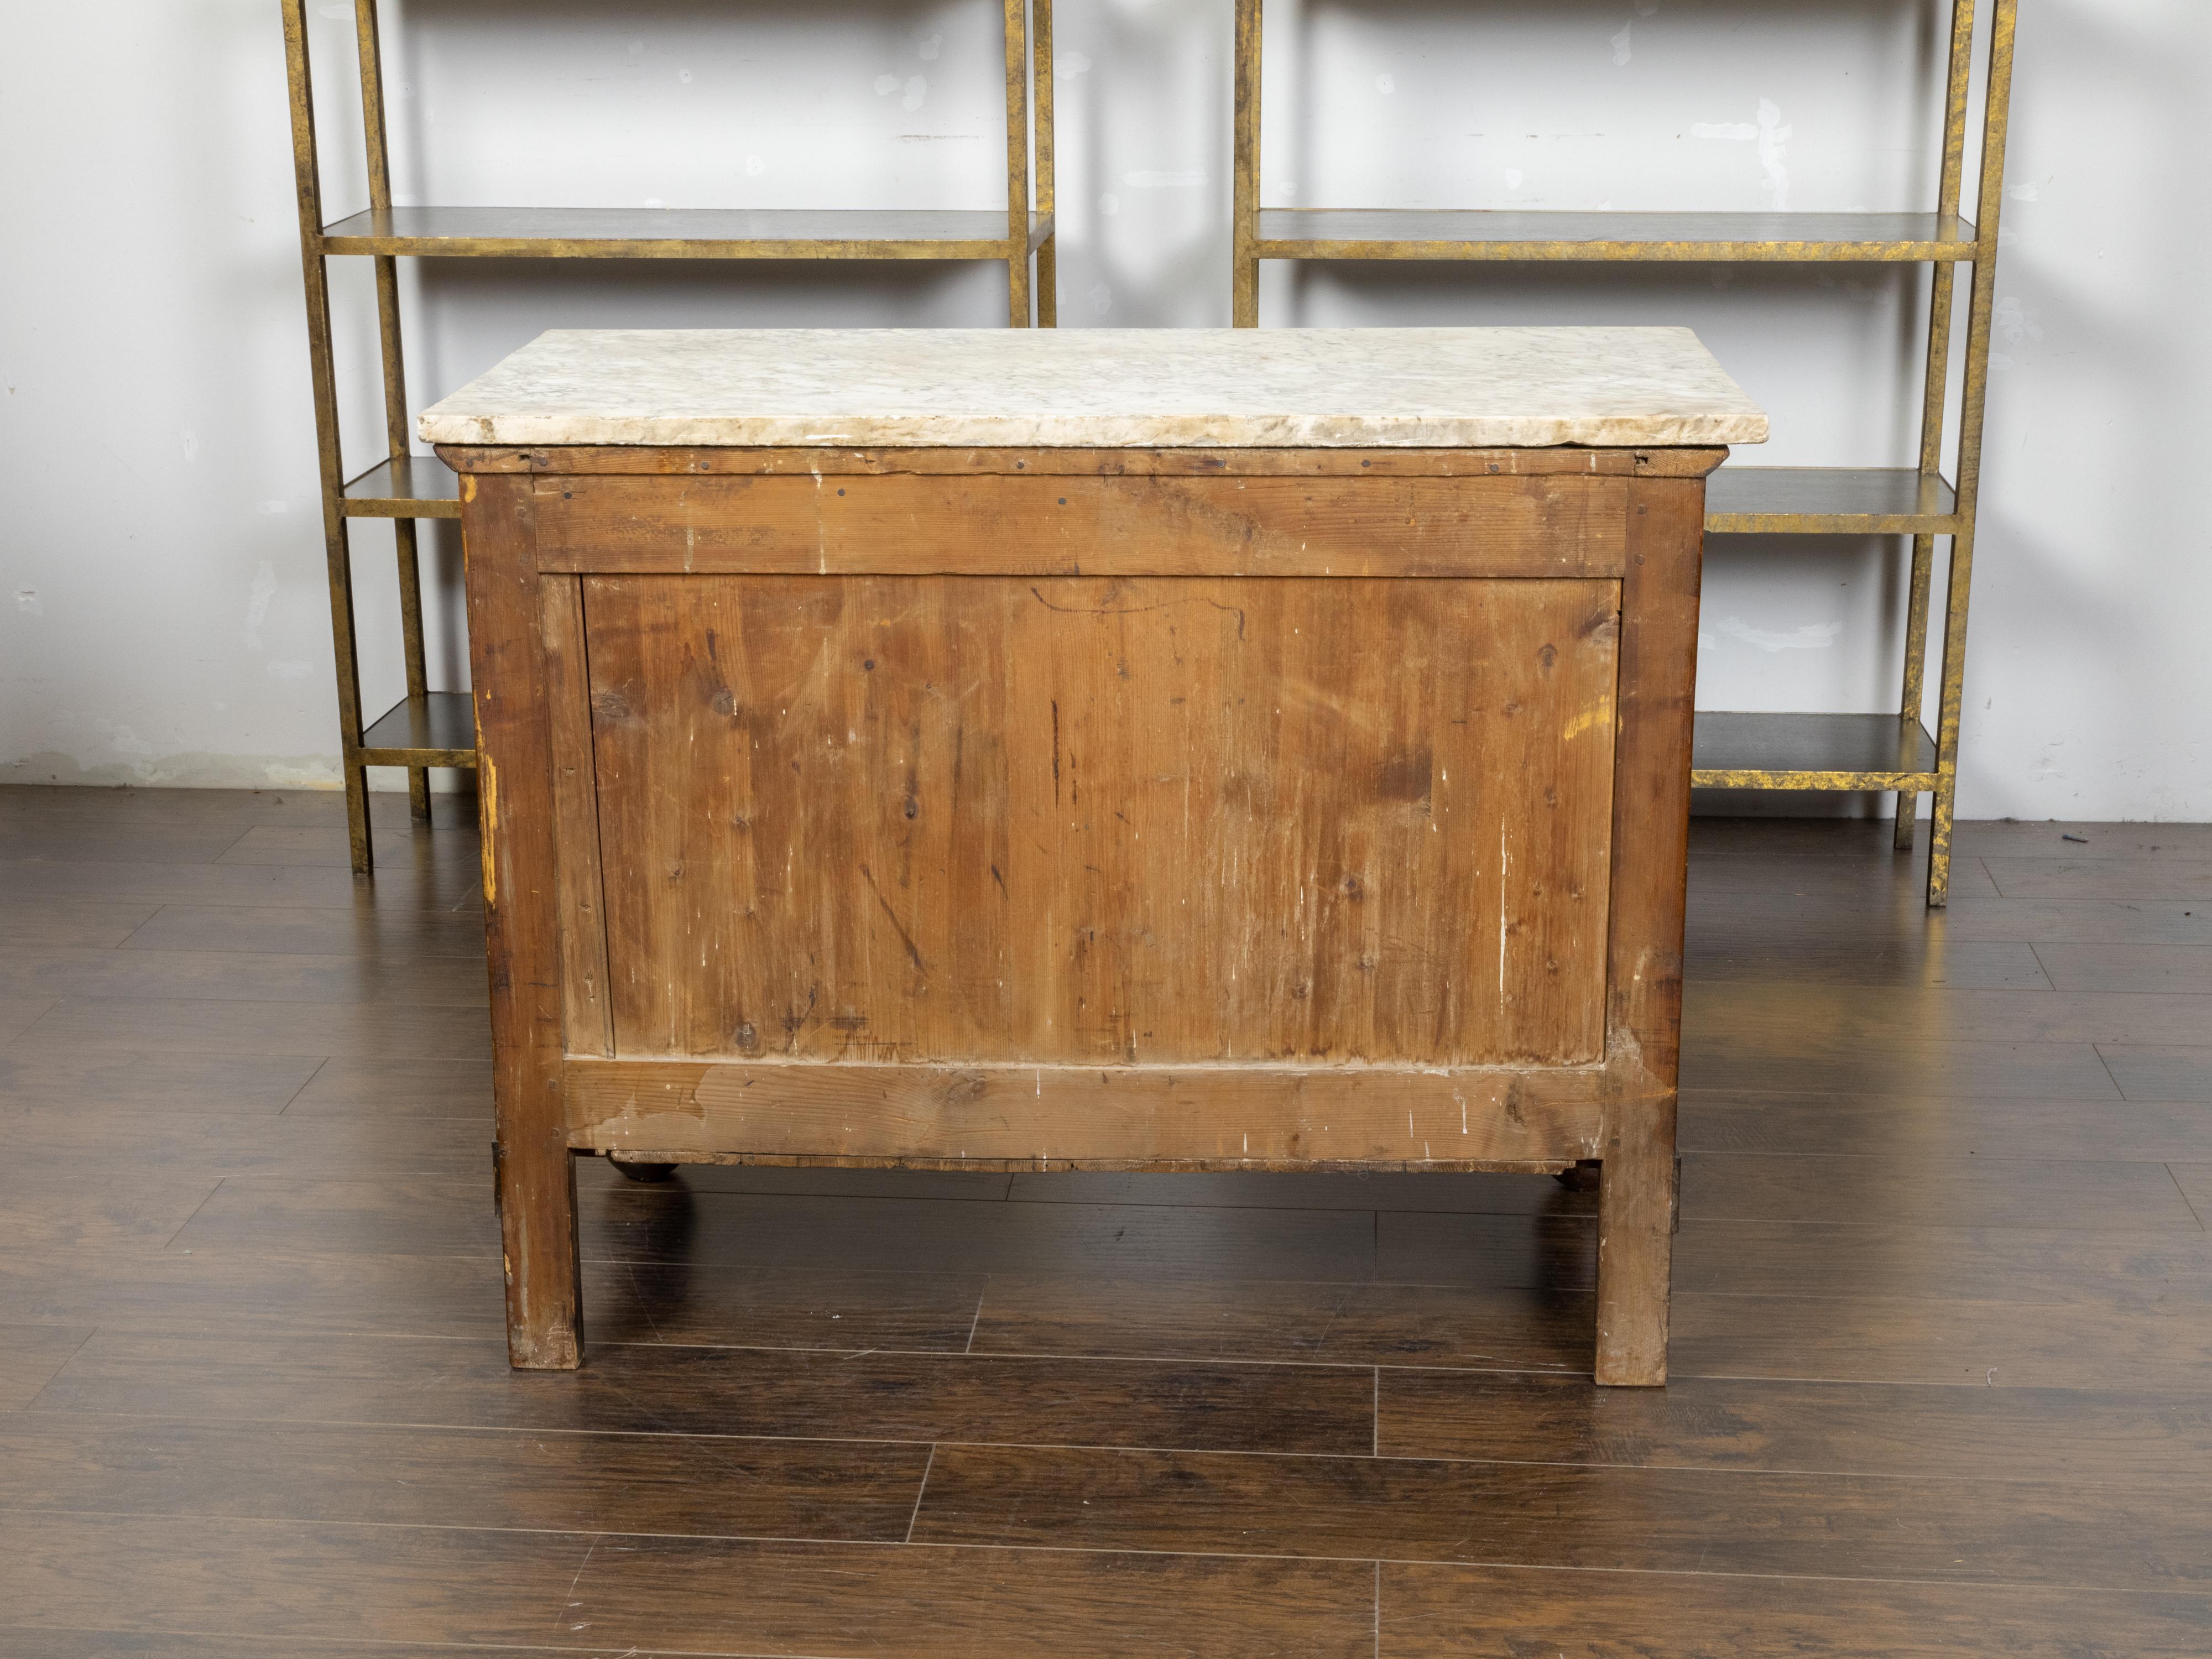 French 19th Century Empire Commode with Marble Top and Column Shaped Posts In Good Condition For Sale In Atlanta, GA